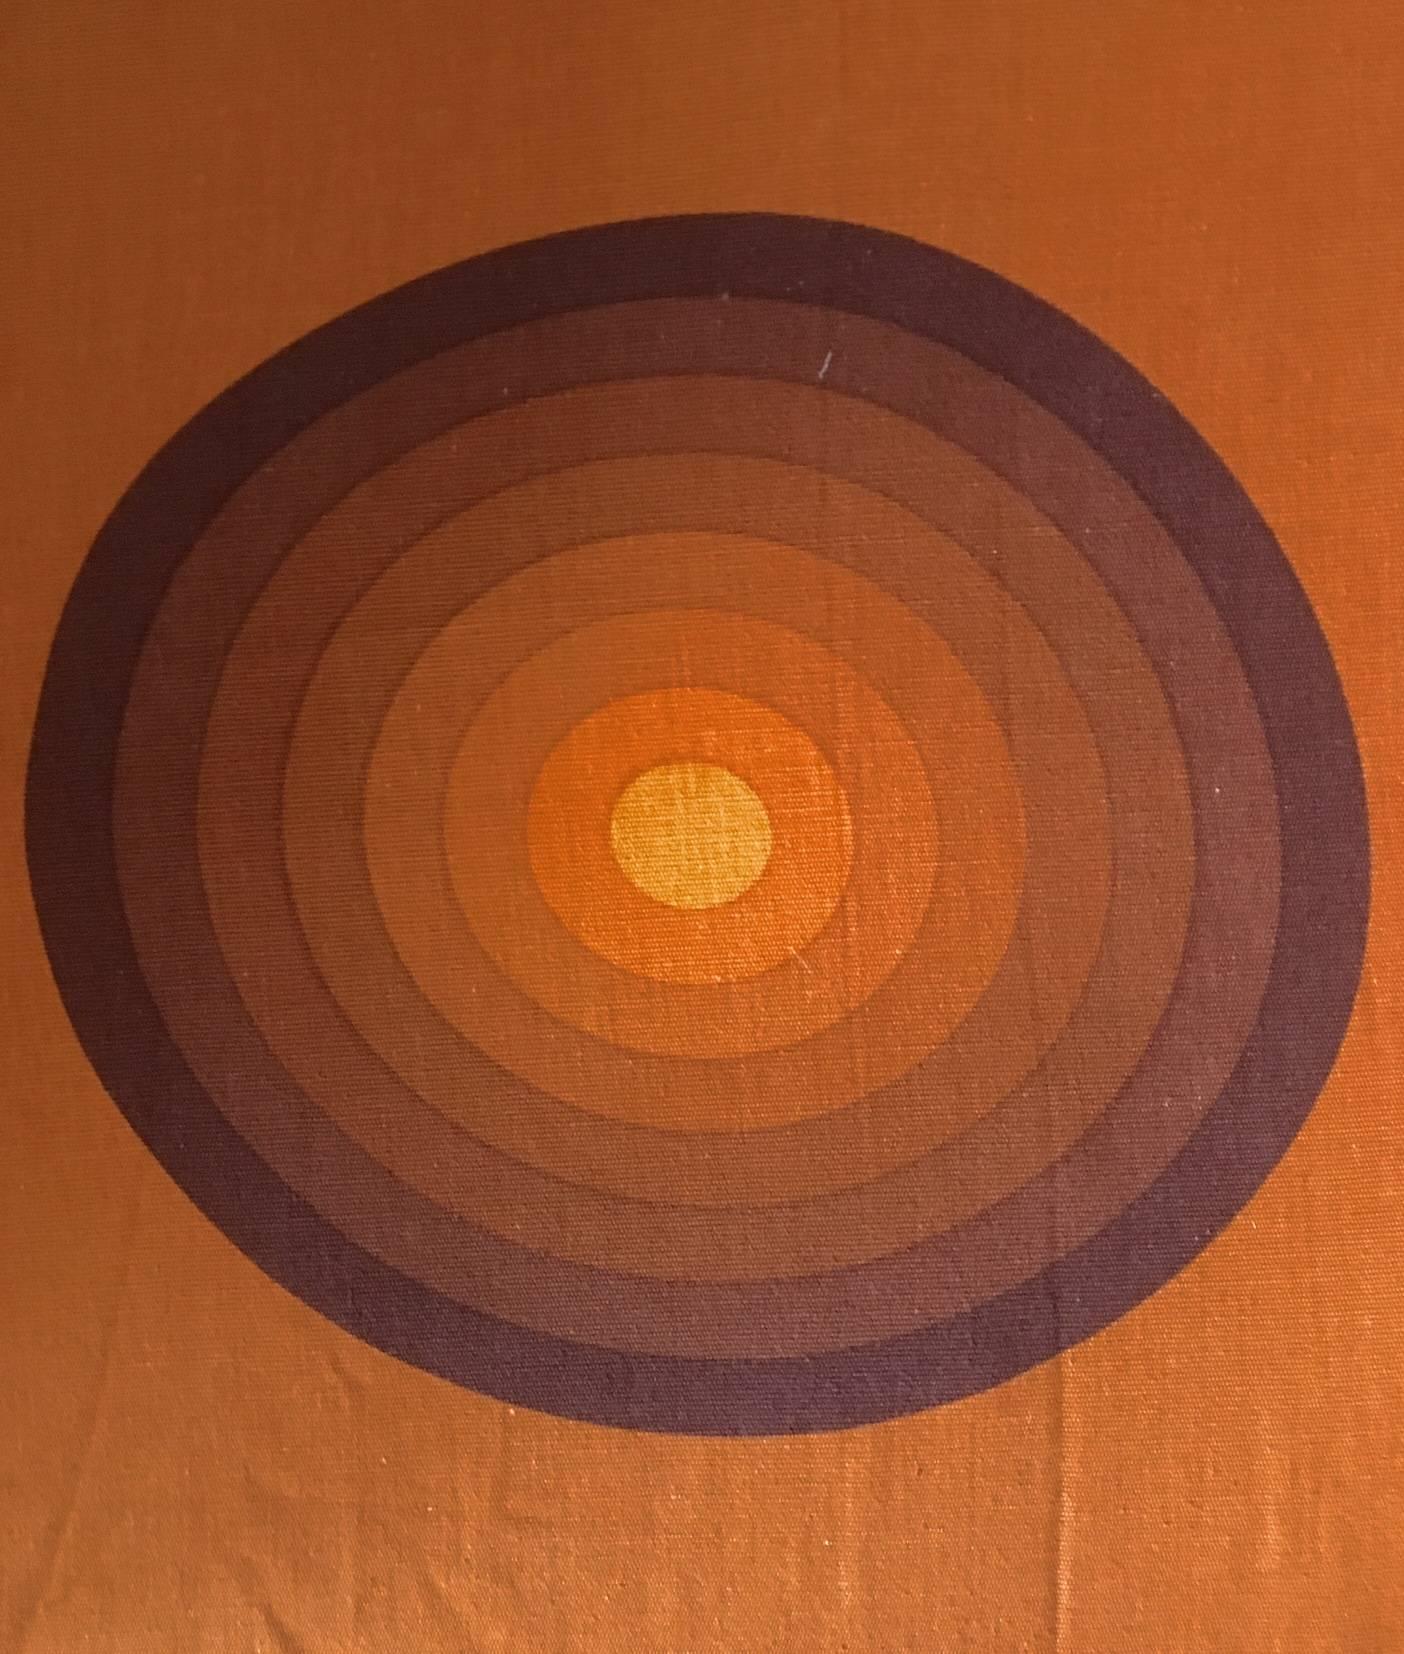 Vintage Verner Panton textile / curtains, manufactured in Denmark, circa 1960s. These pieces feature a symmetric template of multilayered spheres or circles (Spectrum) These layers visually give a multi dimensional look. These textiles can be used